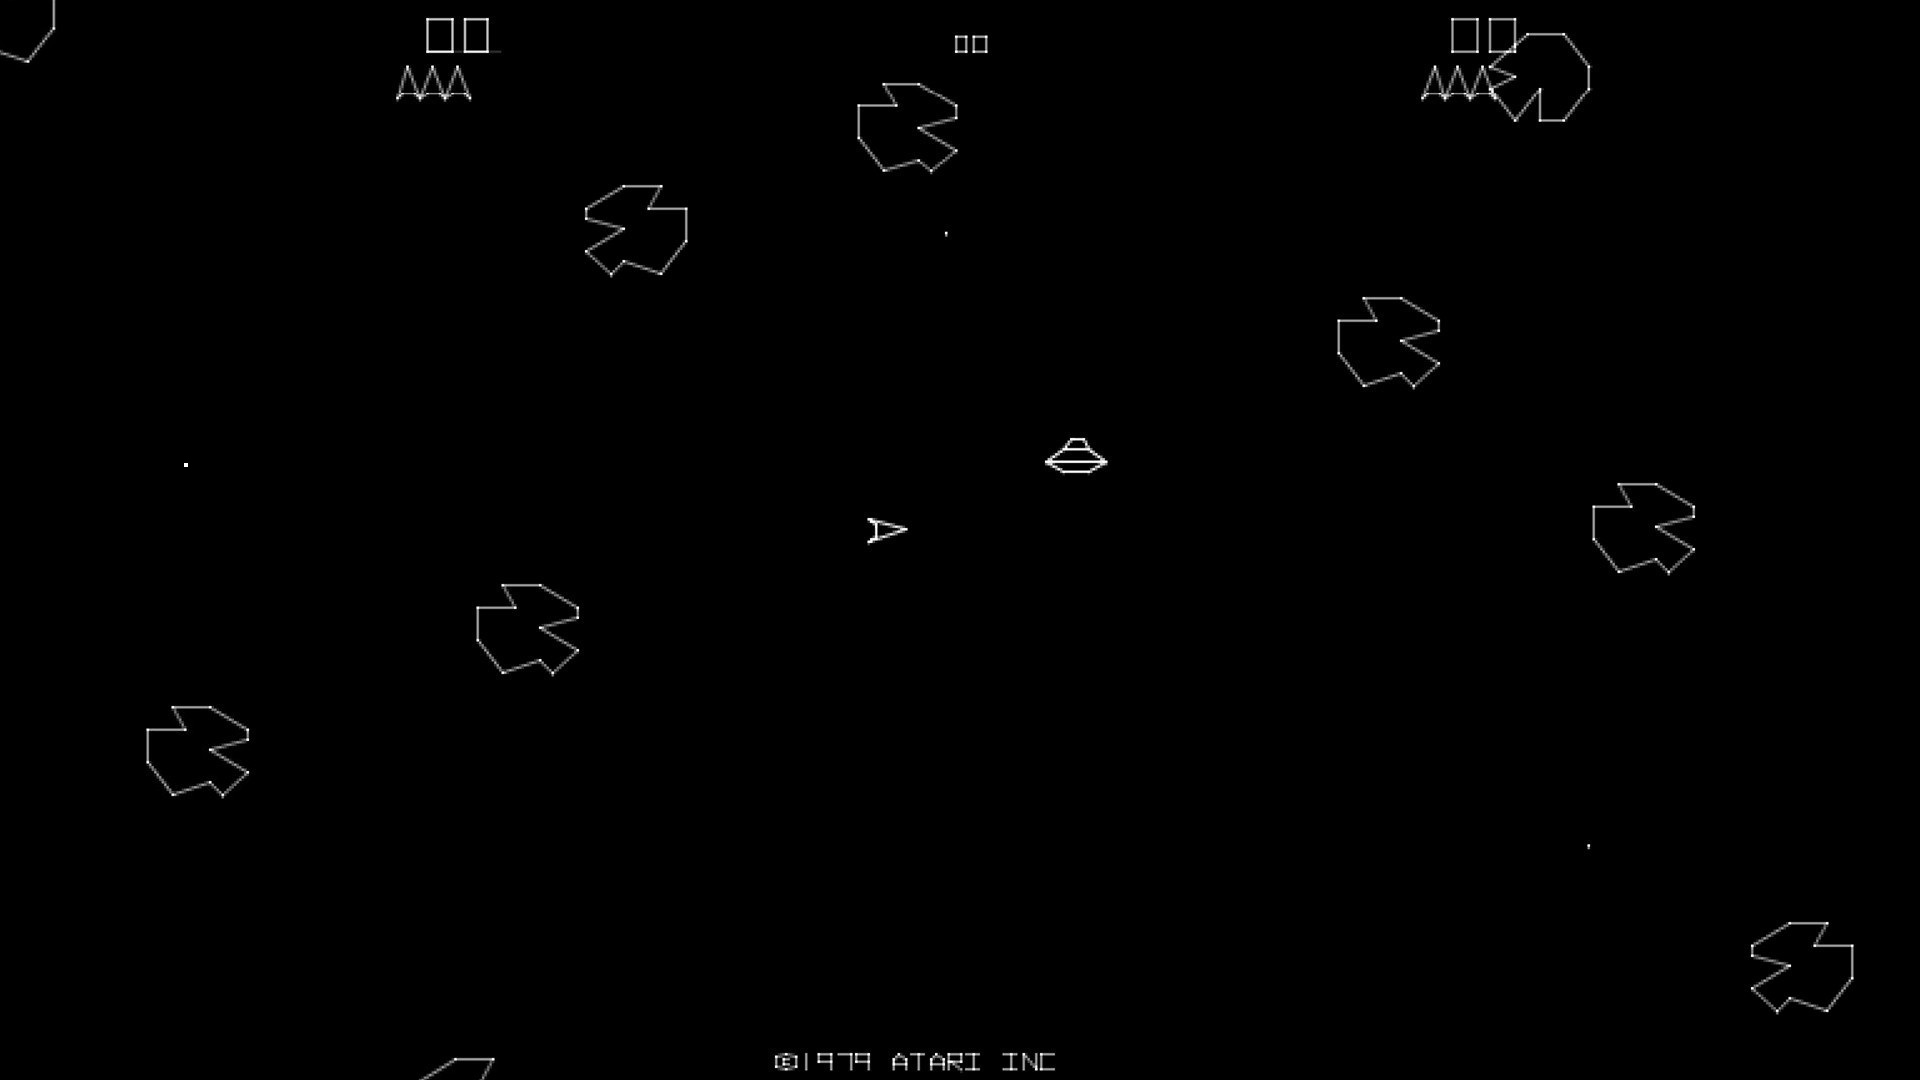 asteroids, video game cellphone